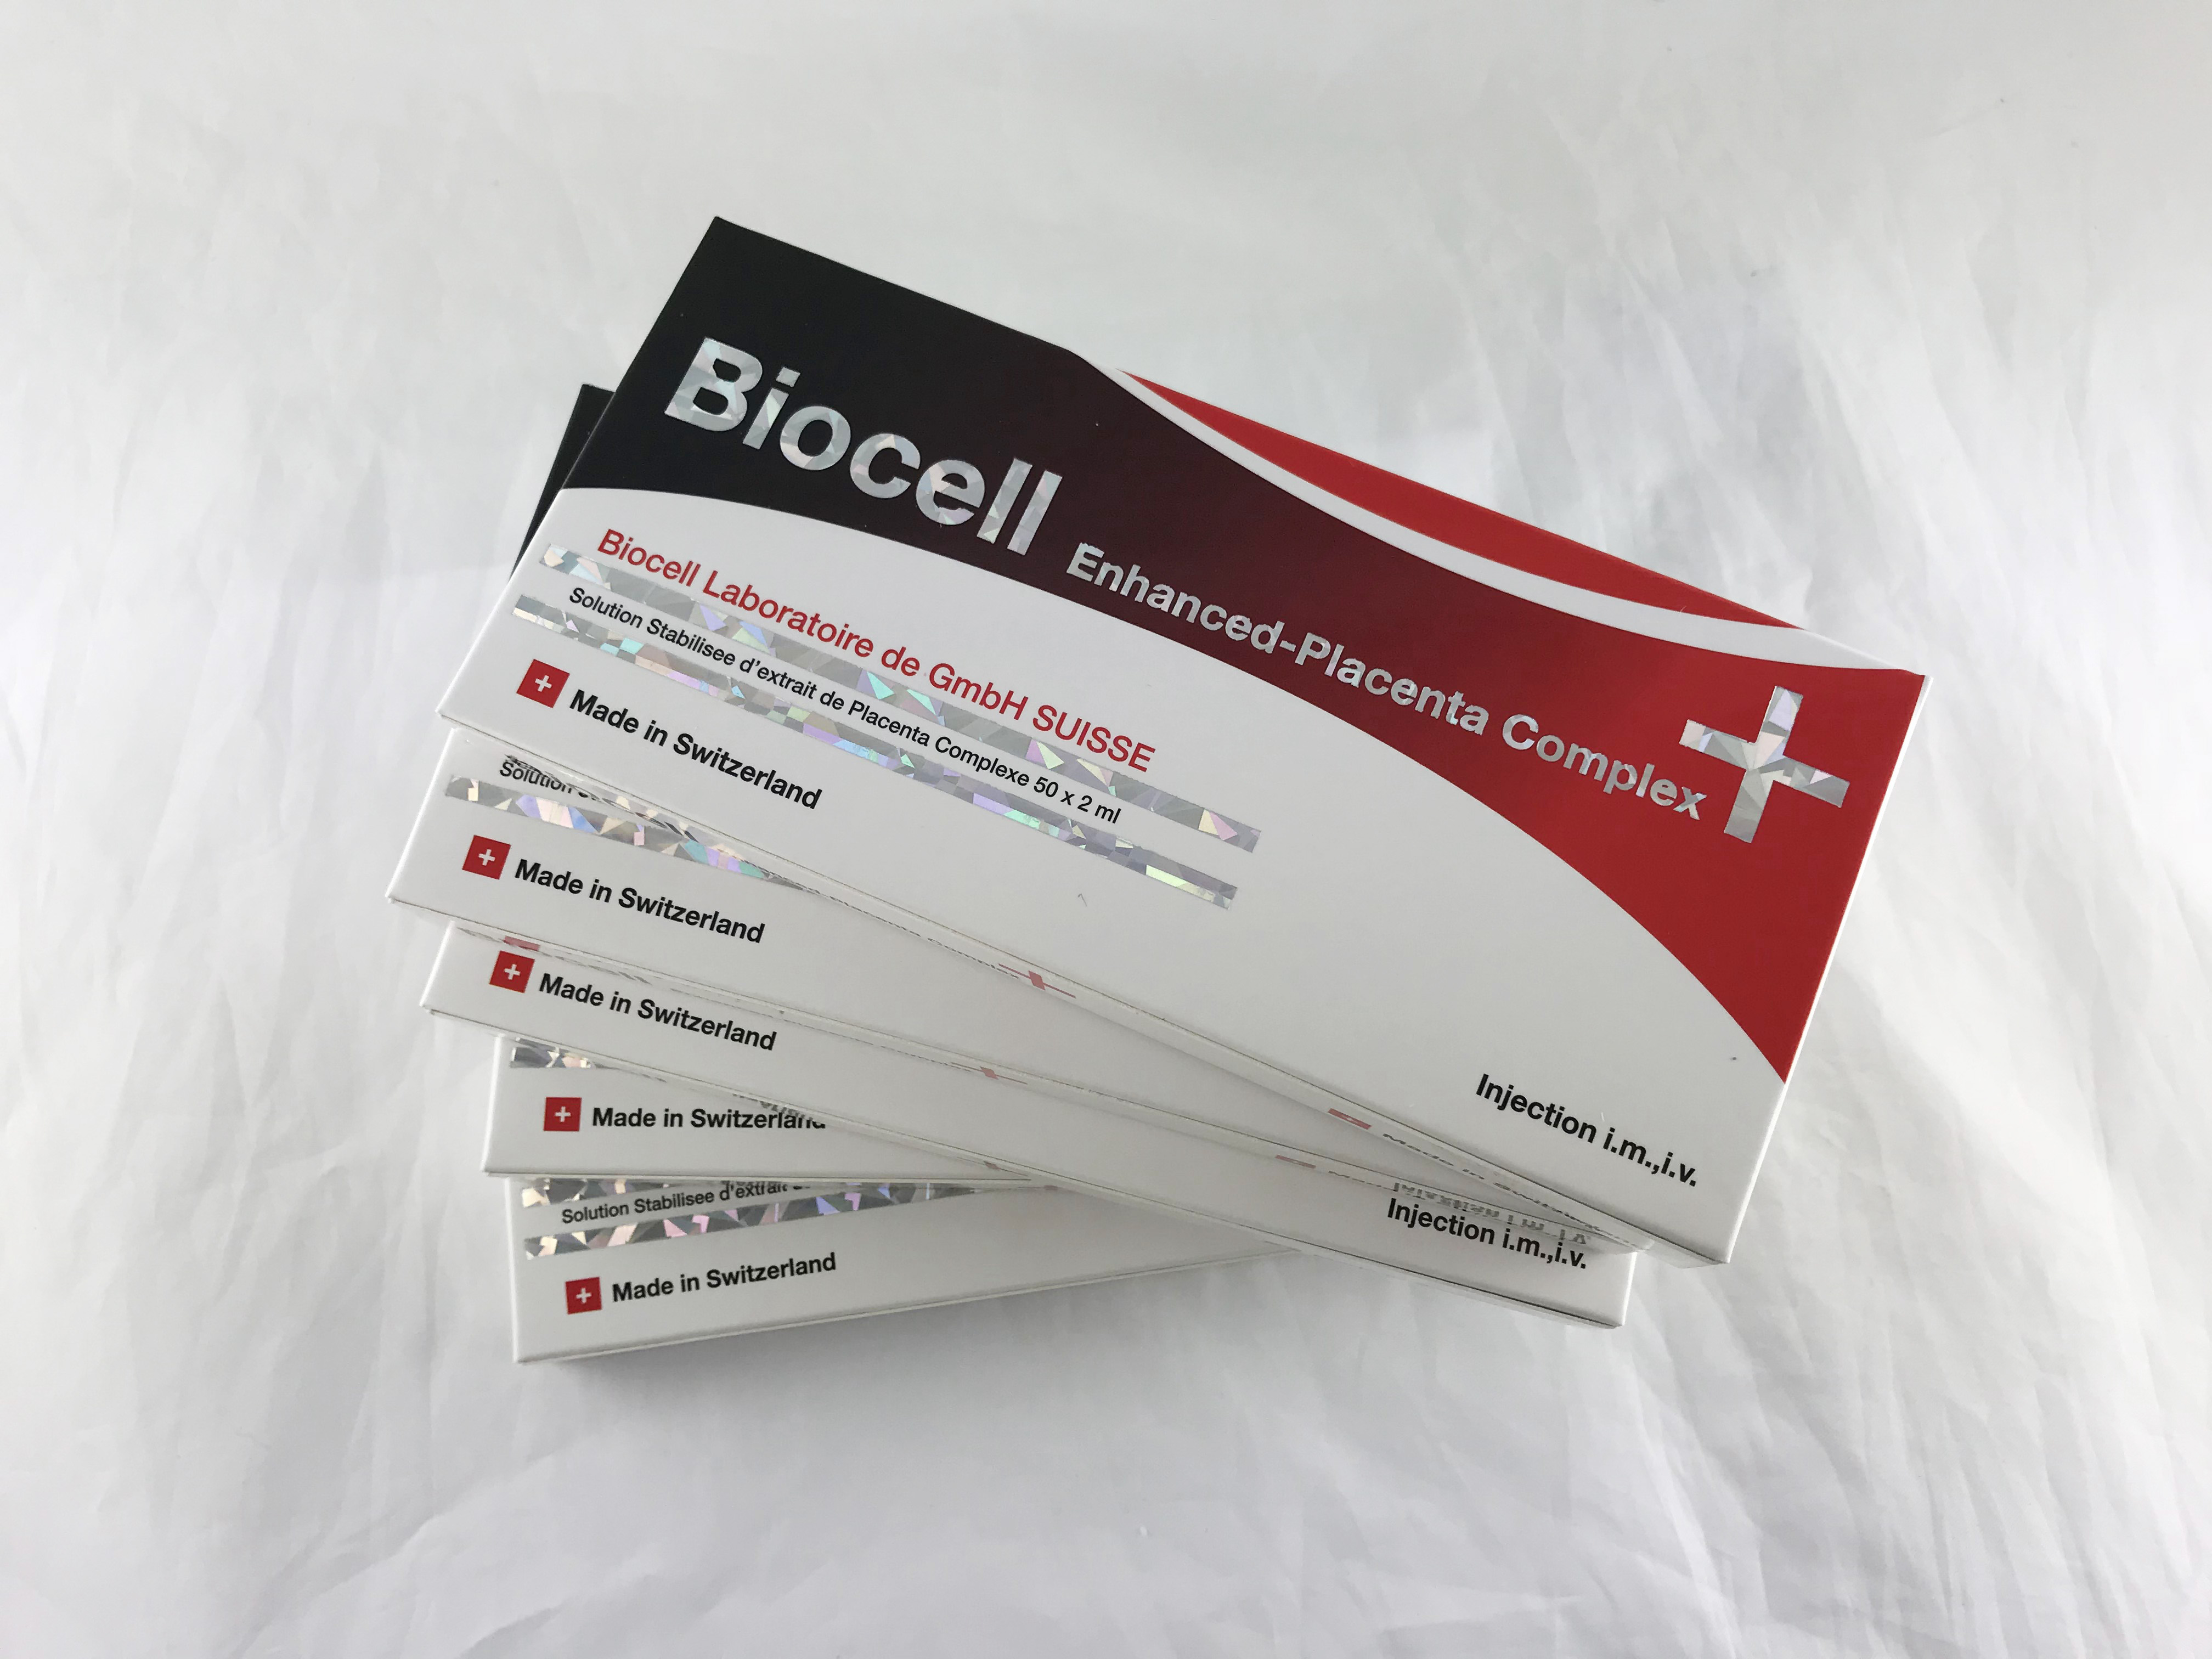 BIOCELL ENHANCED - PLACENTA COMPLEX PLUS+ (SWISS) INJECTION by www.ccthaitown.com